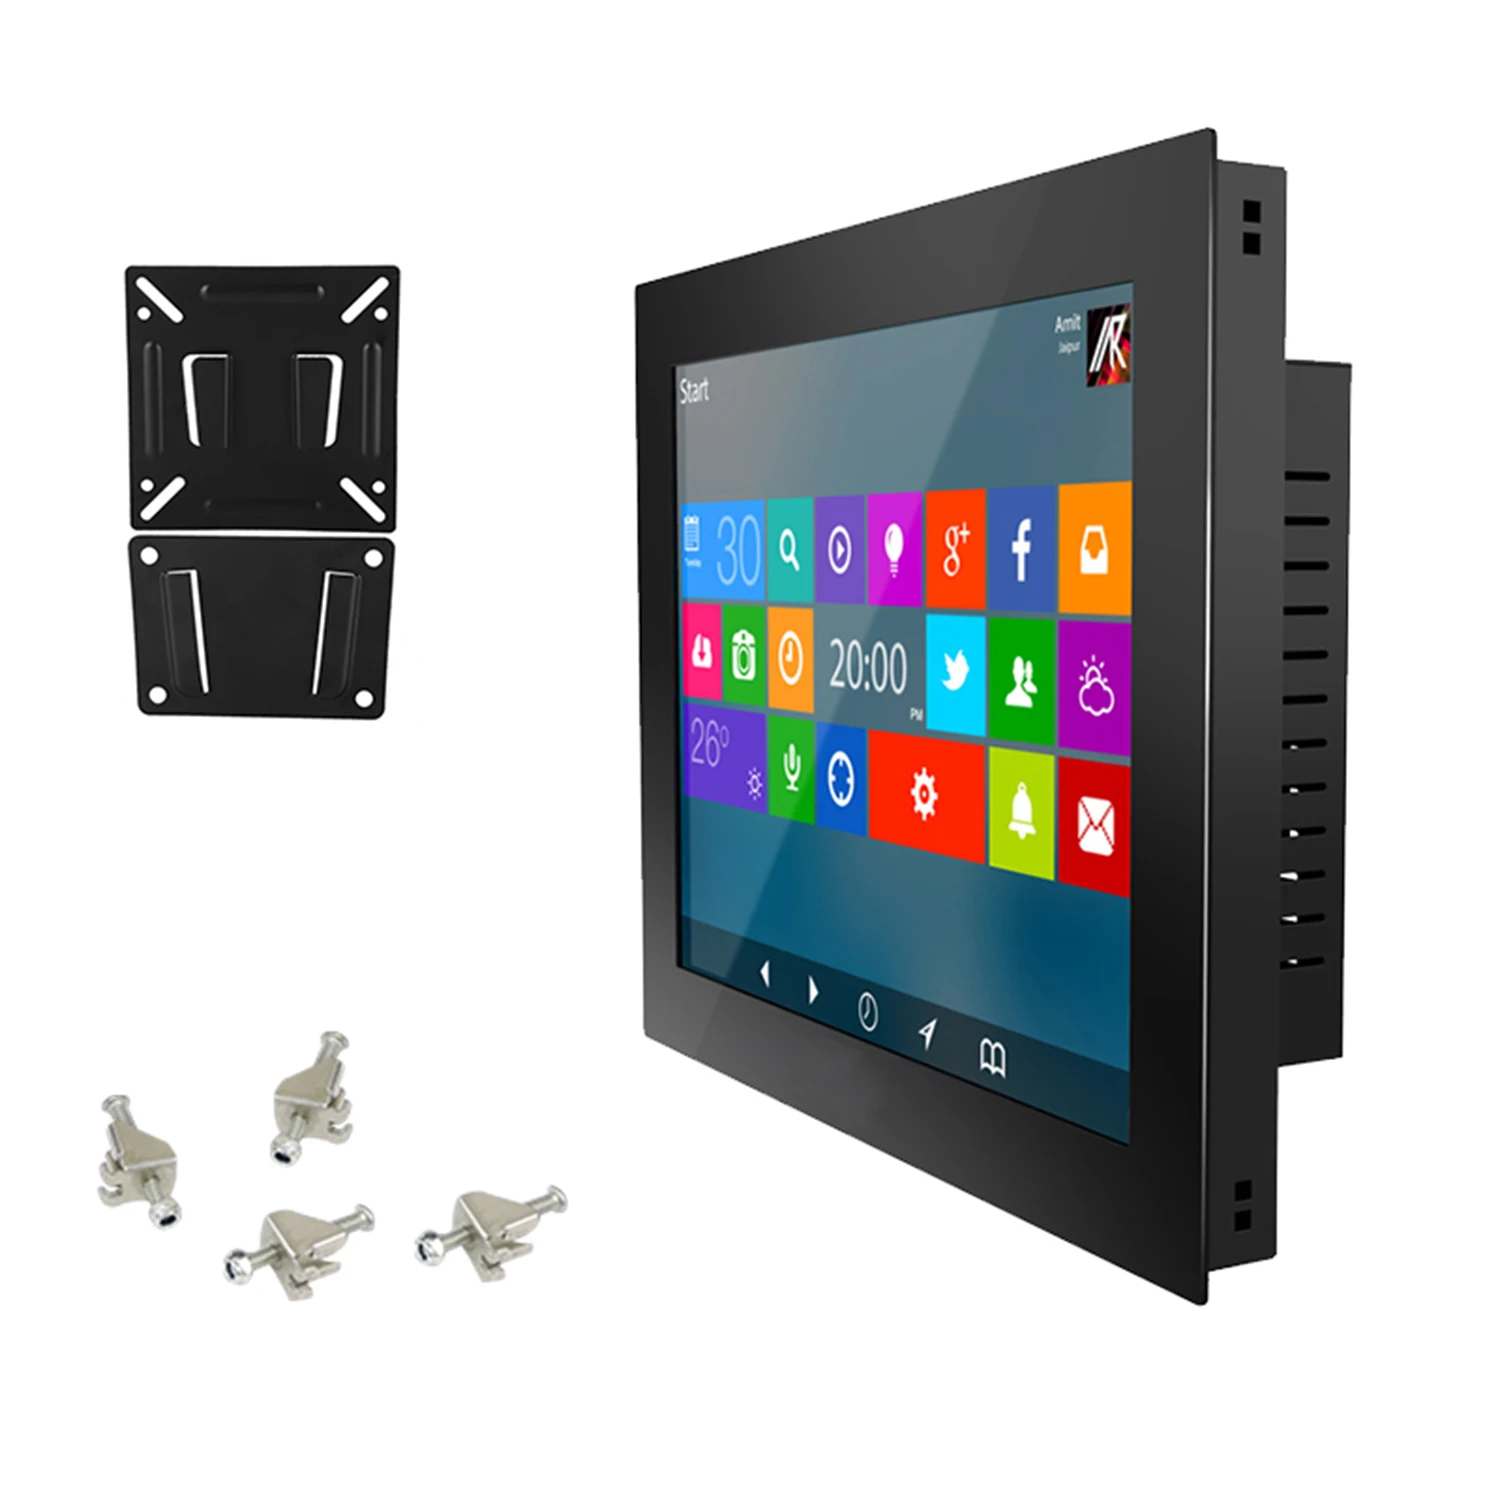 

18.5 19 23.6 Inch Embedded Tablet Panel All-in-one PC Industrial Computer with Resistive Touch Screen Built-in WiFi RS232 Com